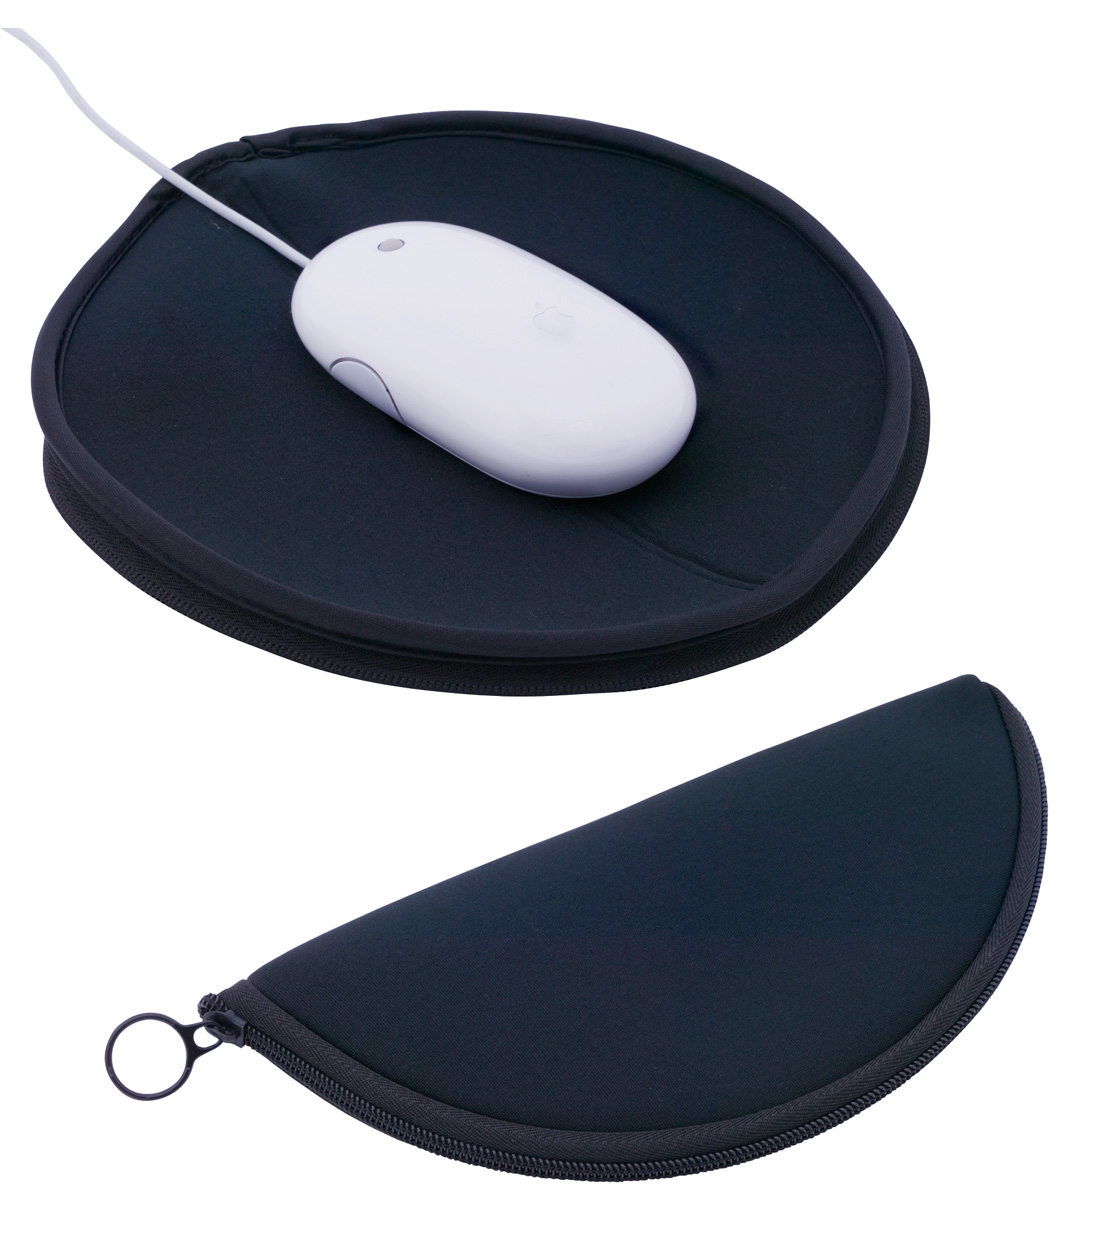 Rat mouse pad and case